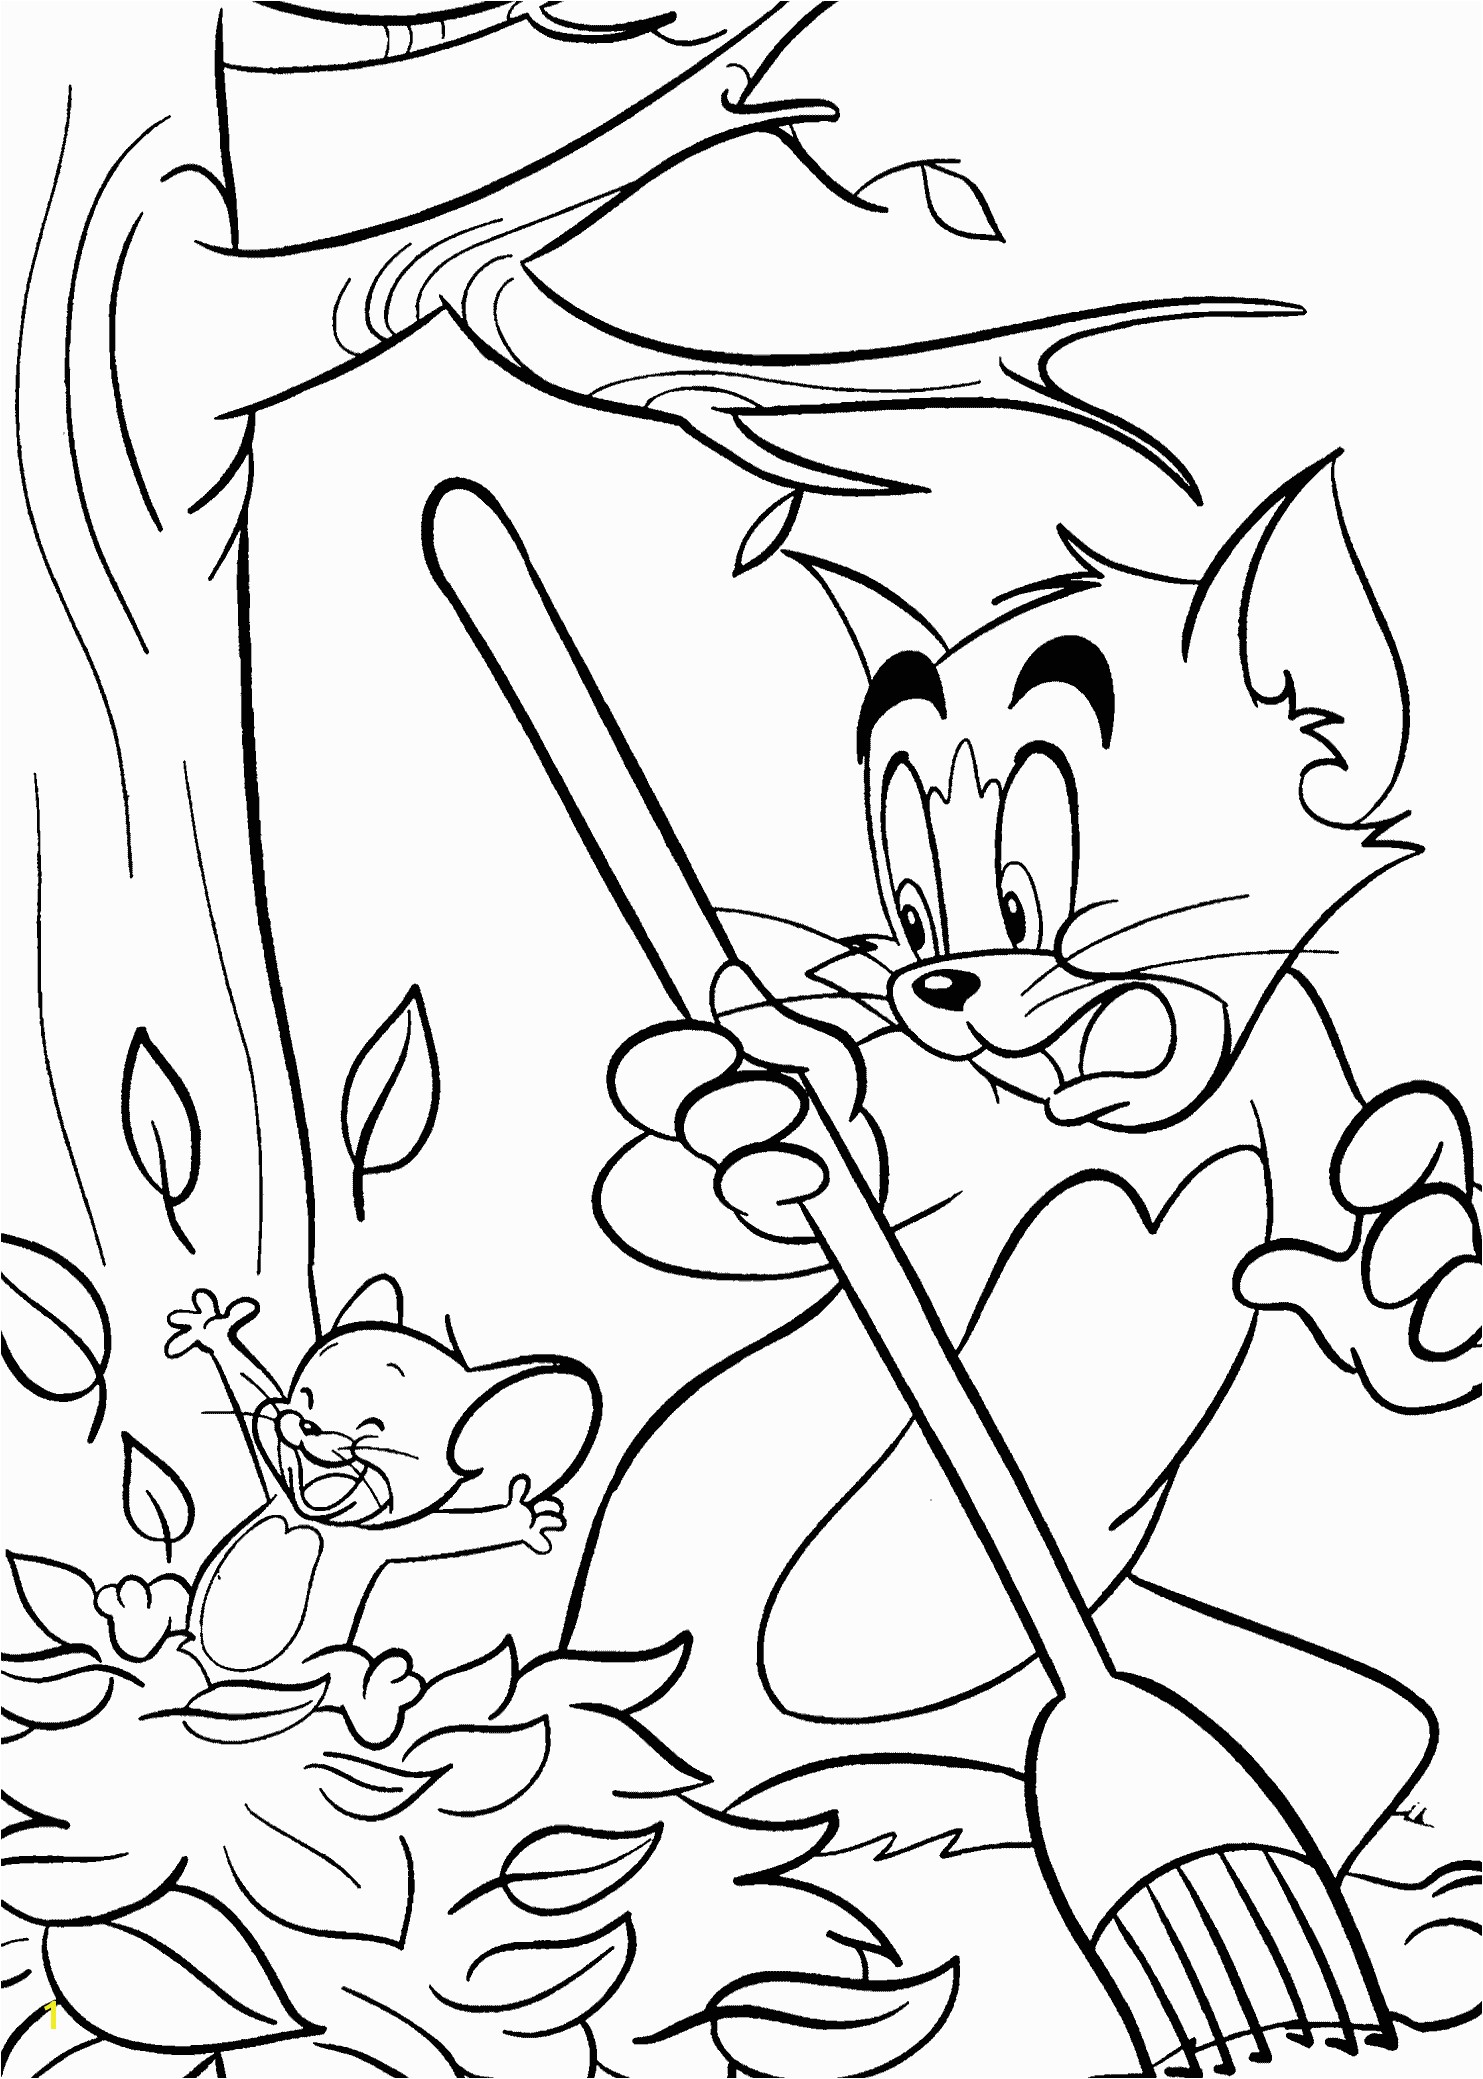 Jerry From tom and Jerry Coloring Pages Inspirational tom and Jerry Coloring Pages Coloring Pages